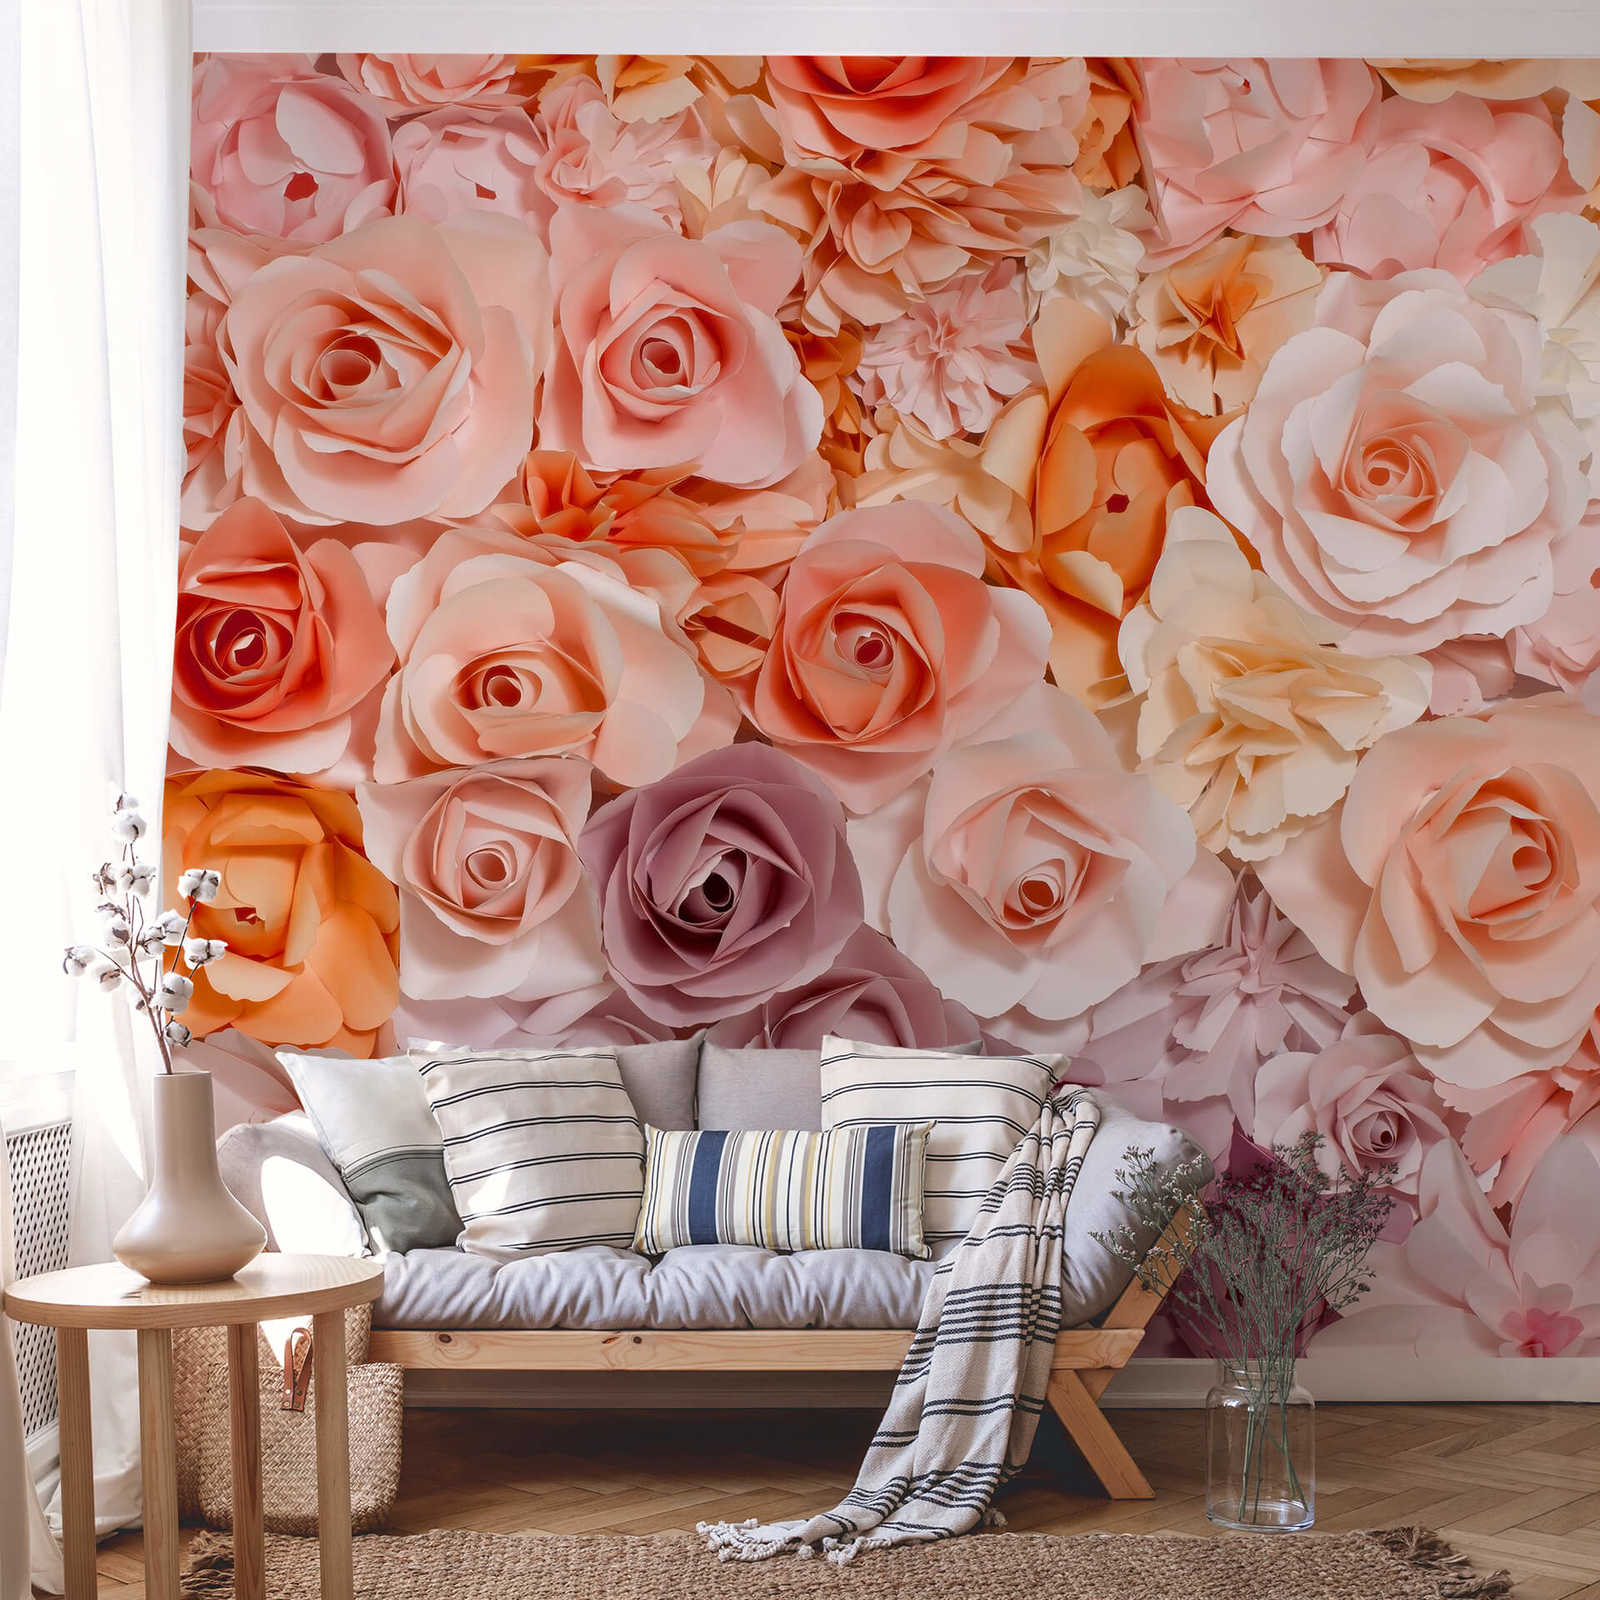             3D Photo wallpaper with rose petals pattern - pink, white
        